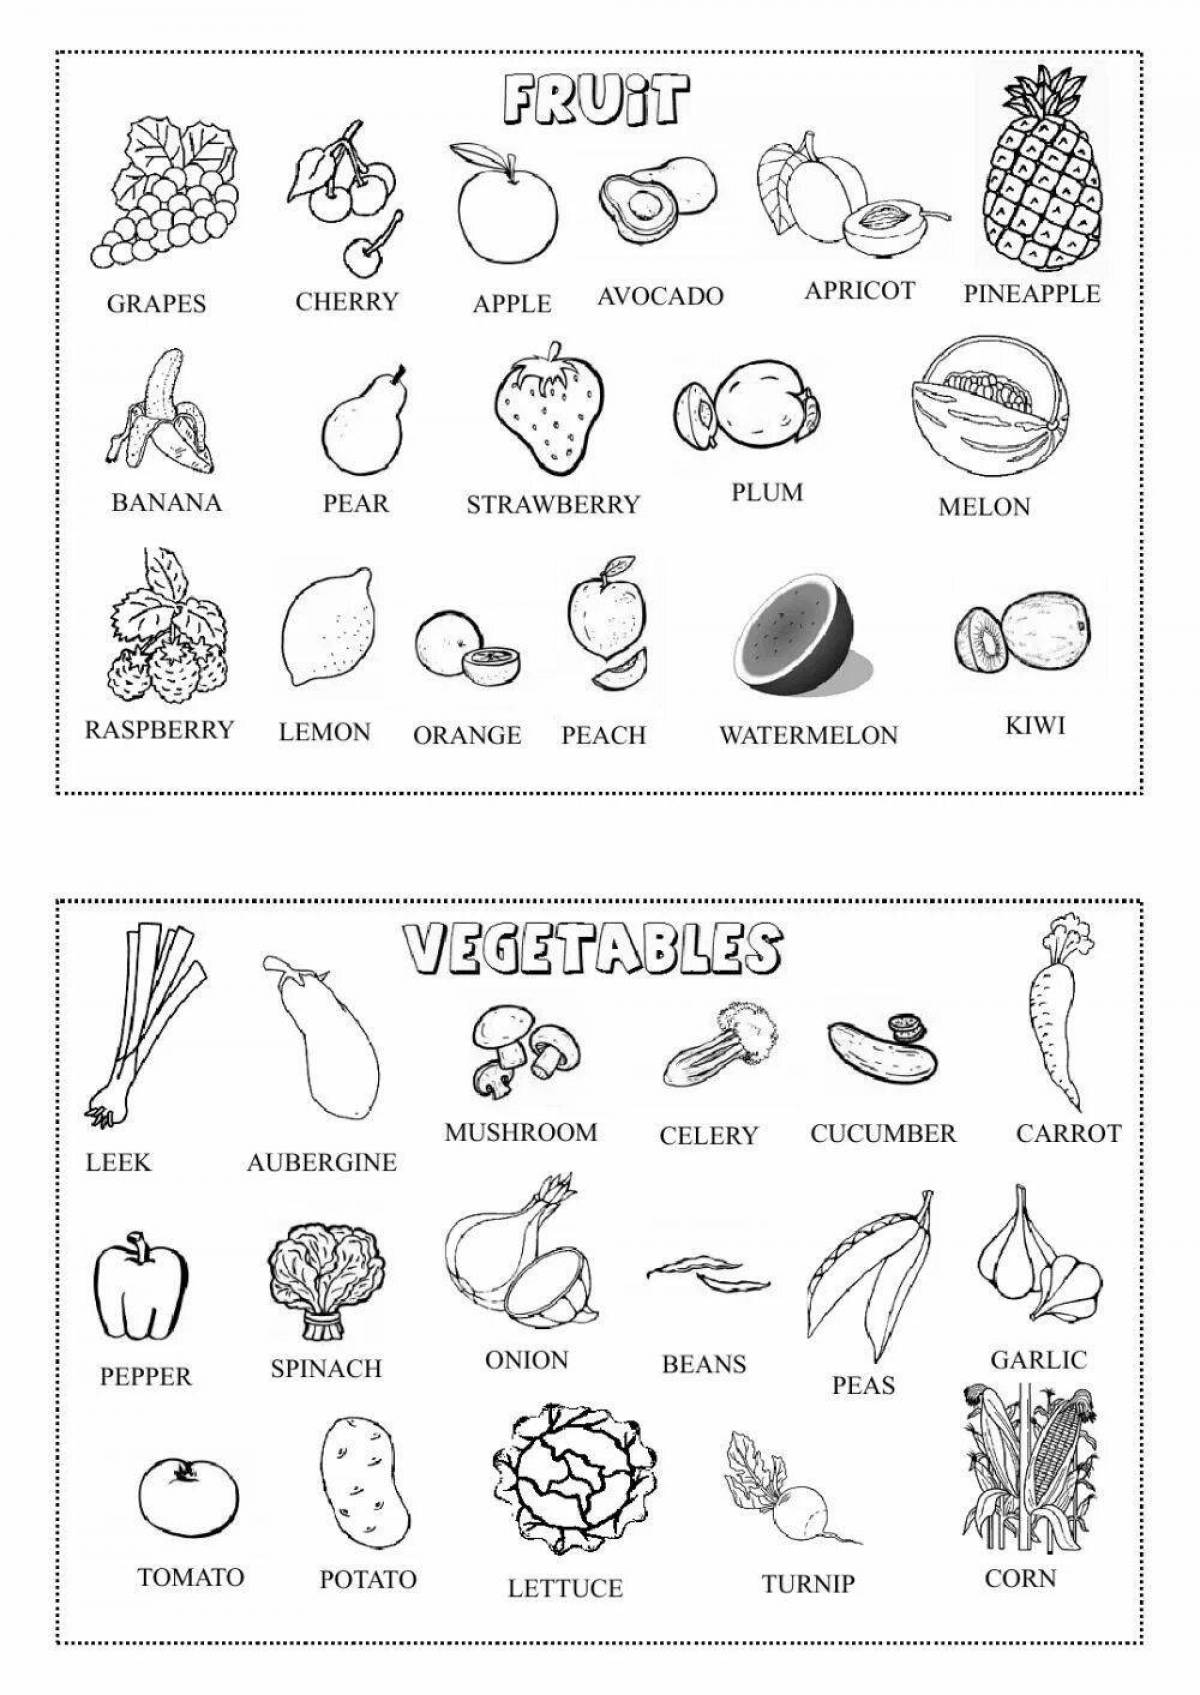 Attractive vegetable coloring book for kids